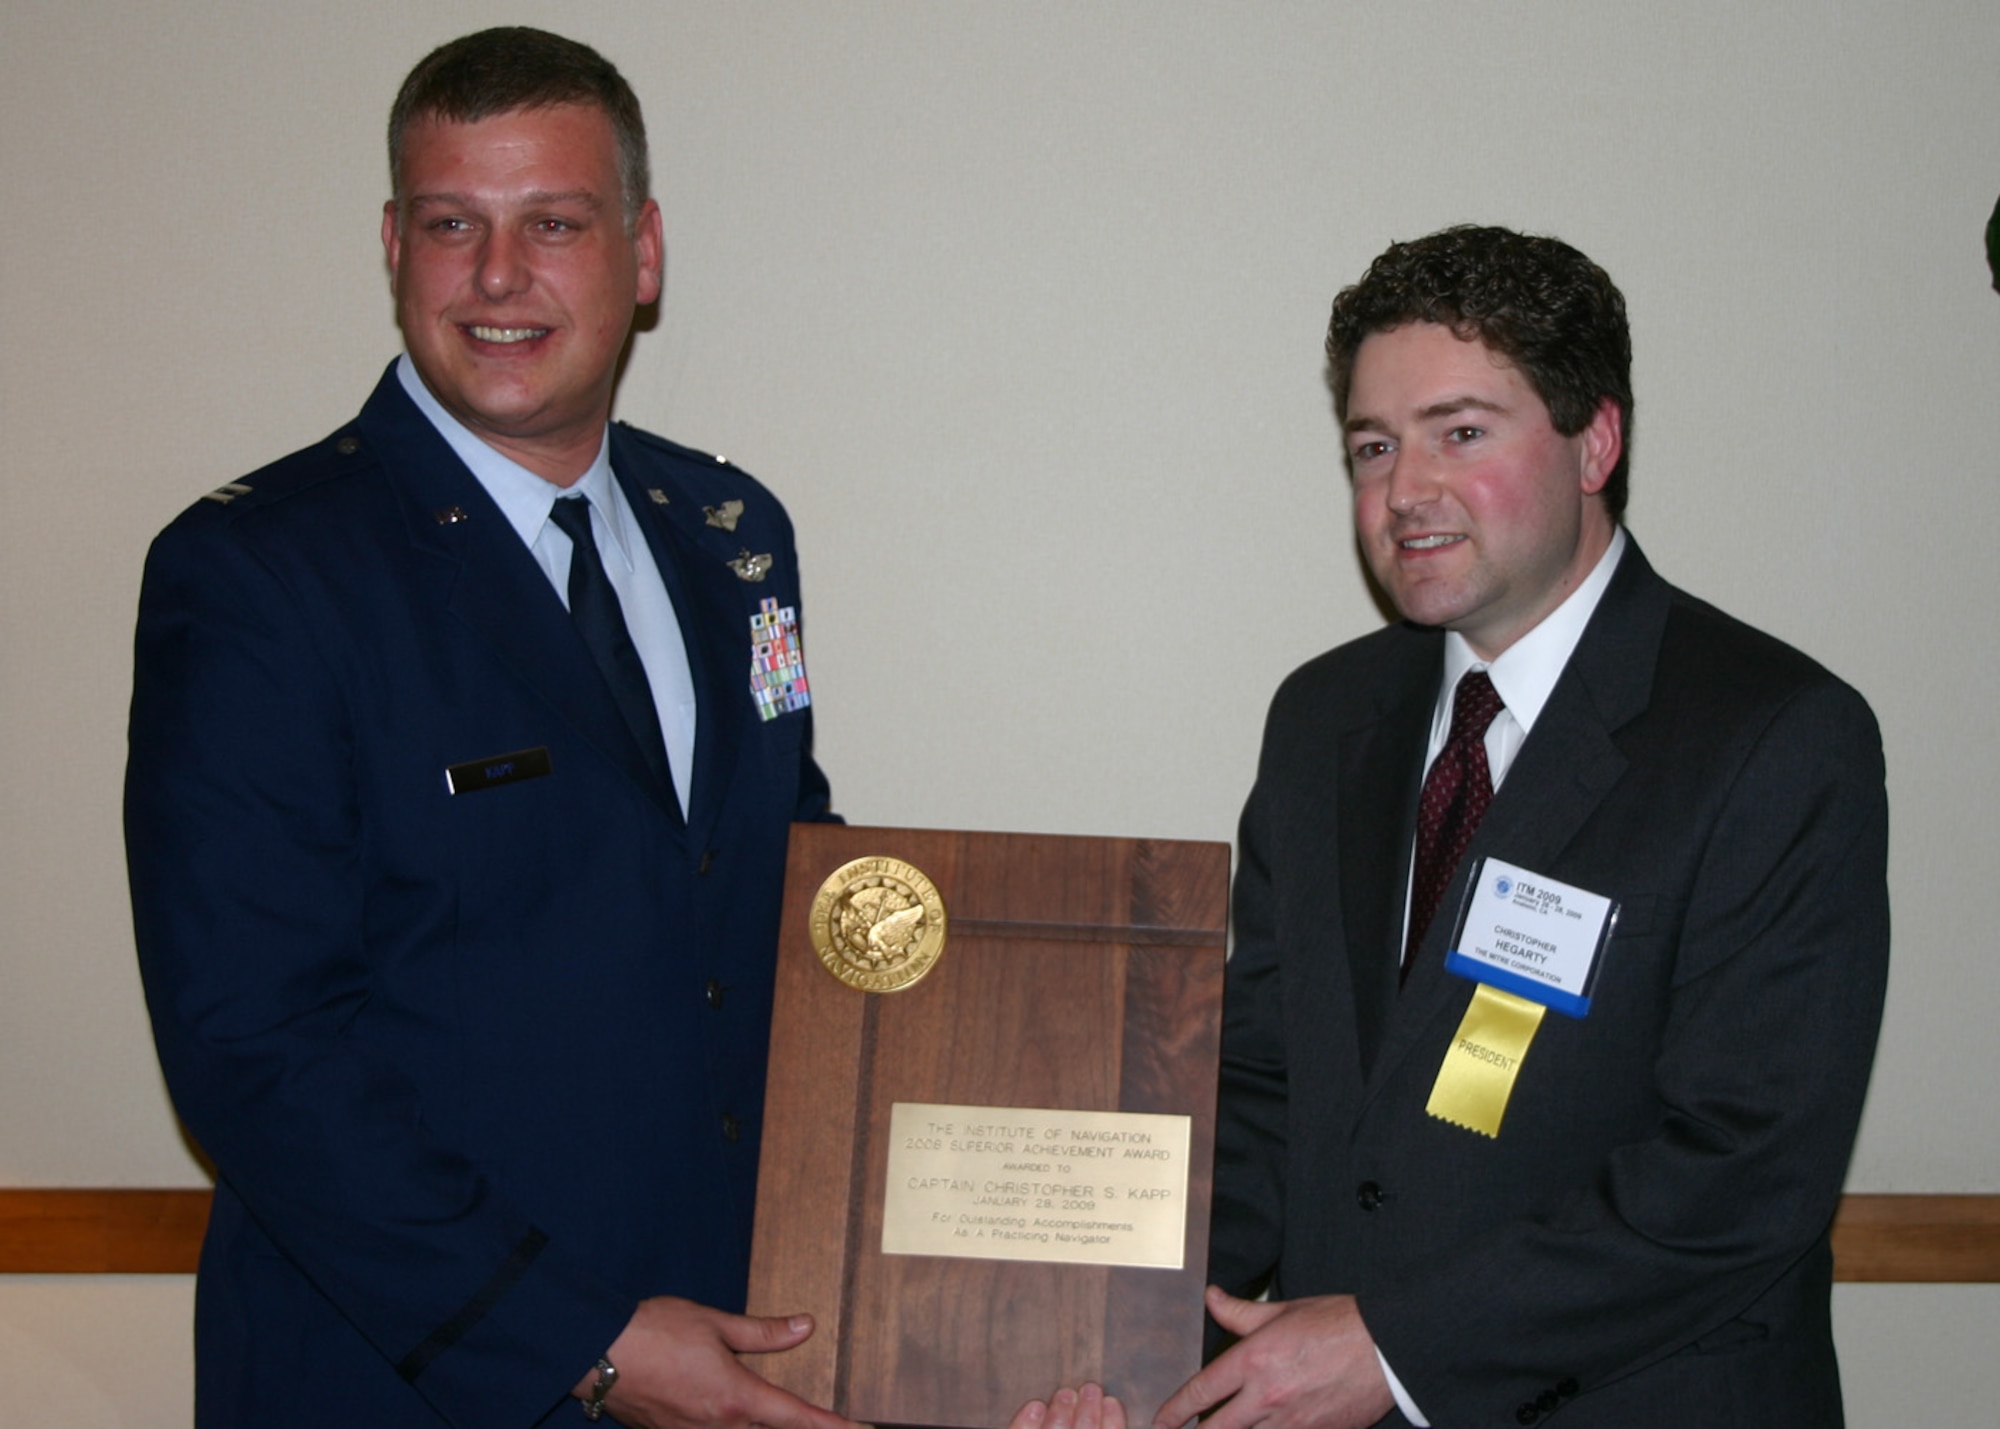 ANAHEIM, Calif. -- Dr. Christopher Hegarty (right), the Institute of Navigation president, presents the 2008 Institute of Navigation Superior Achievement Award to Capt. Christopher Kapp, a MC-130H Combat Talon II navigator who flies with the 1st Special Operations Squadron. The captain won the award for timely execution and precise navigation during operations supporting the Global War on Terror and standout performance in developing cutting edge joint aero-maritime rescue procedures. The purpose of the award is to recognize individuals making outstanding contributions to the advancement of navigation. (Courtesy photo)